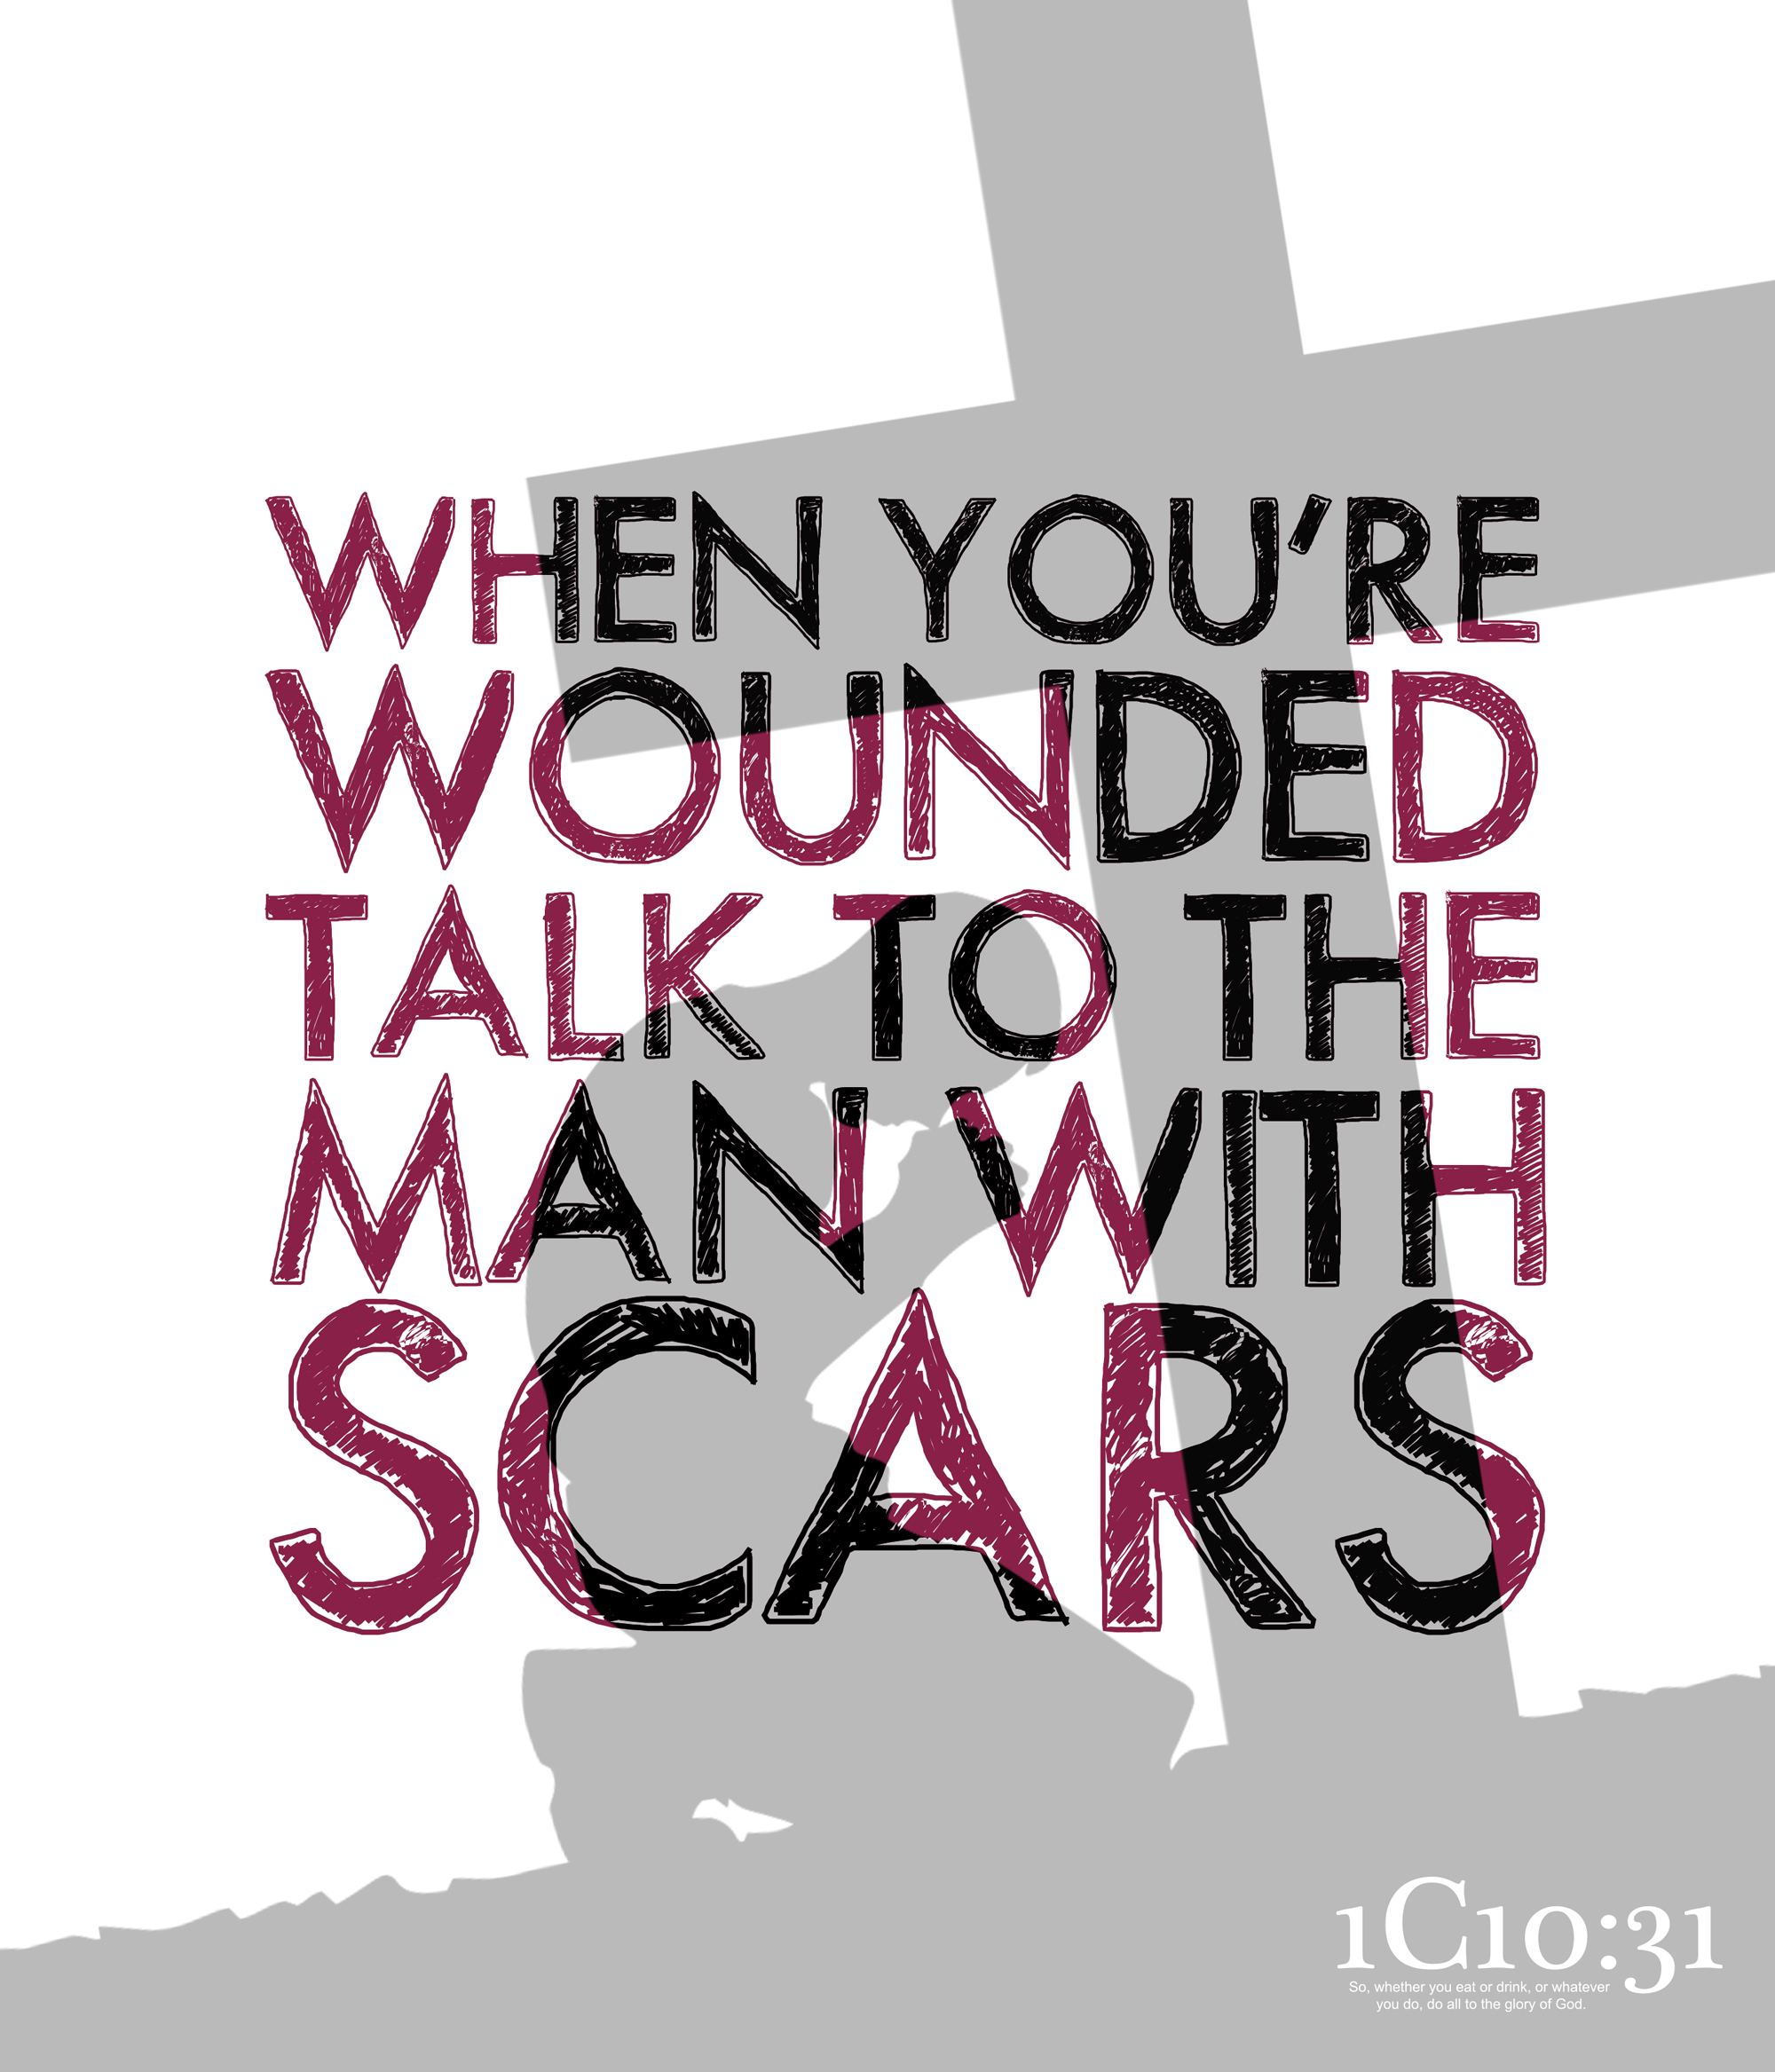 When you’re wounded talk to the Man with scars